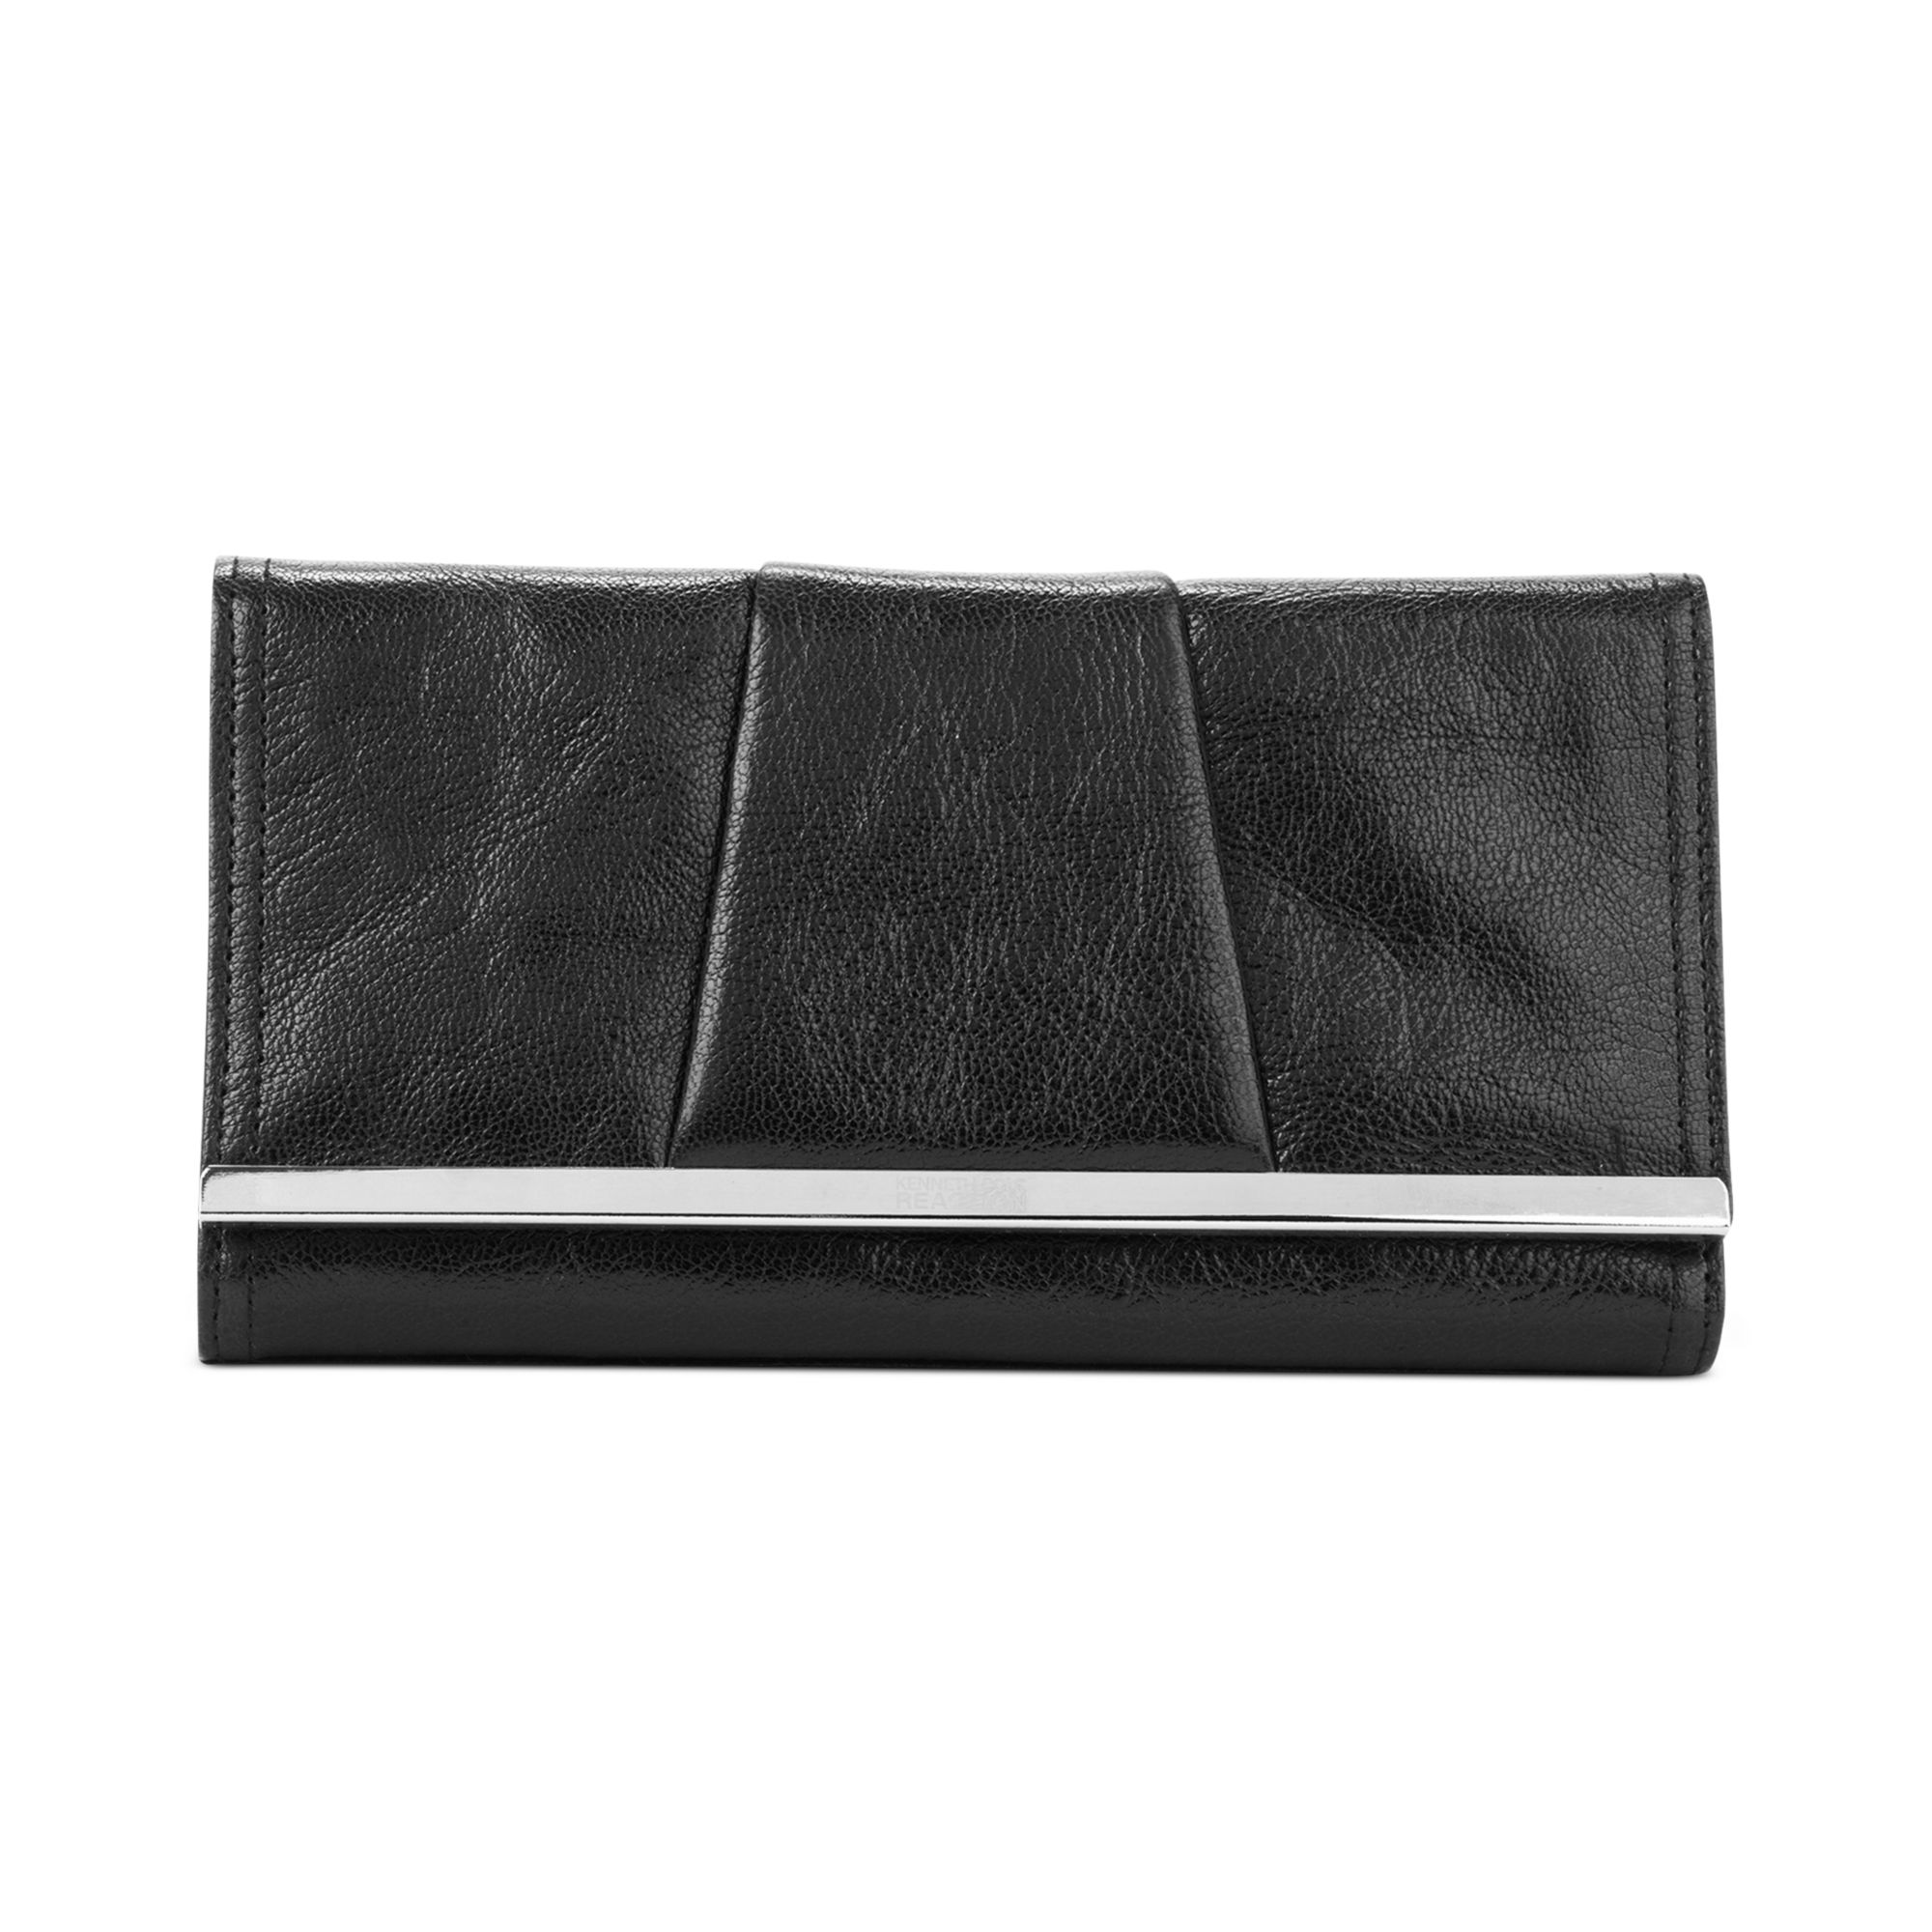 Kenneth Cole Reaction Barcelona Leather Flap Clutch Wallet in Black | Lyst